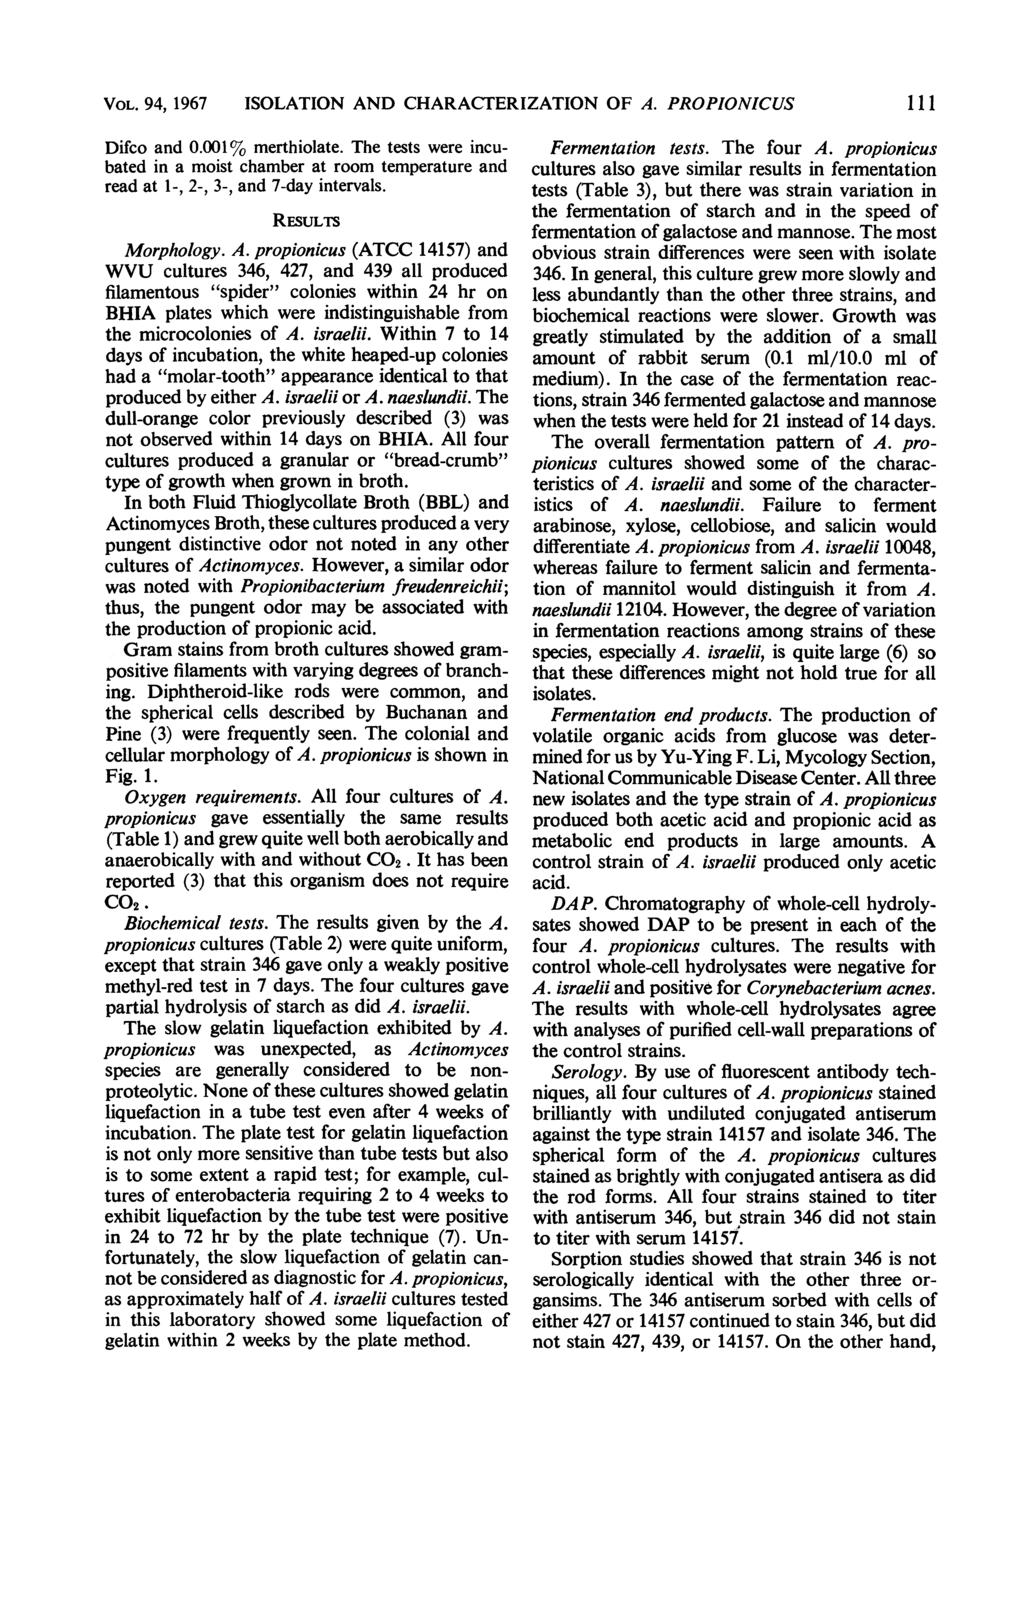 VOL. 94, 1967 ISOLATION AND CHARACTERIZATION OF A. PROPIONICUS Difco and 0.001% merthiolate.